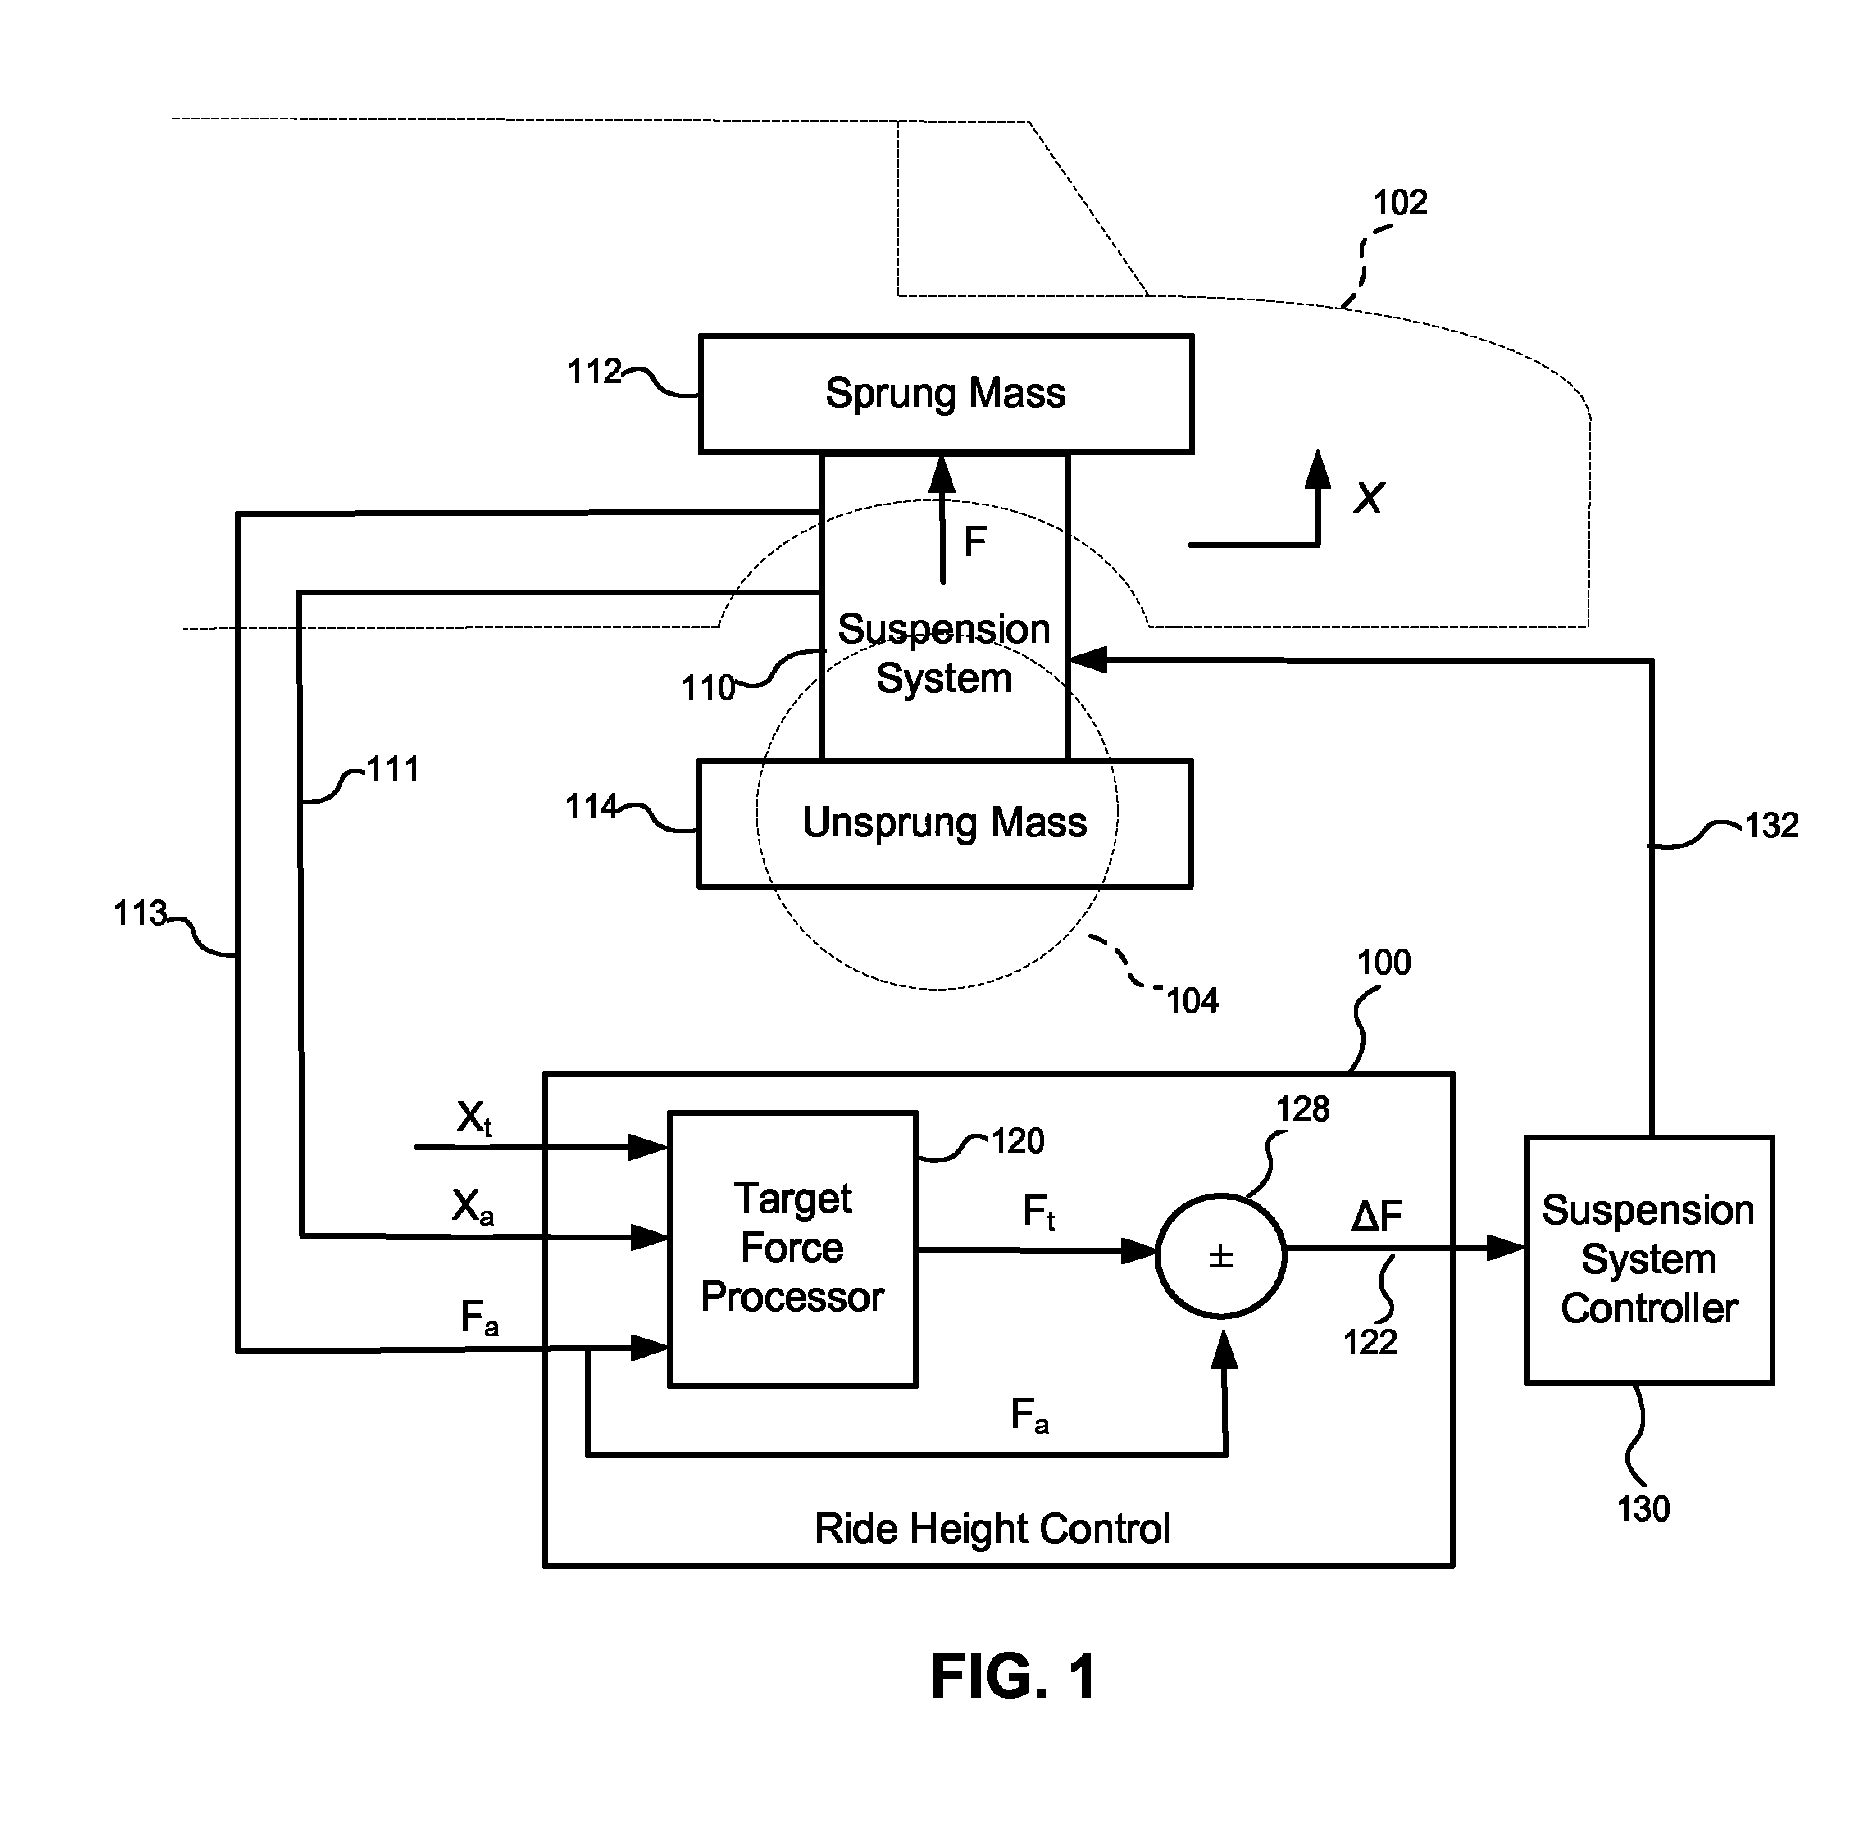 Ride height control system and method for controlling load distribution at target ride height in a vehicle suspension system